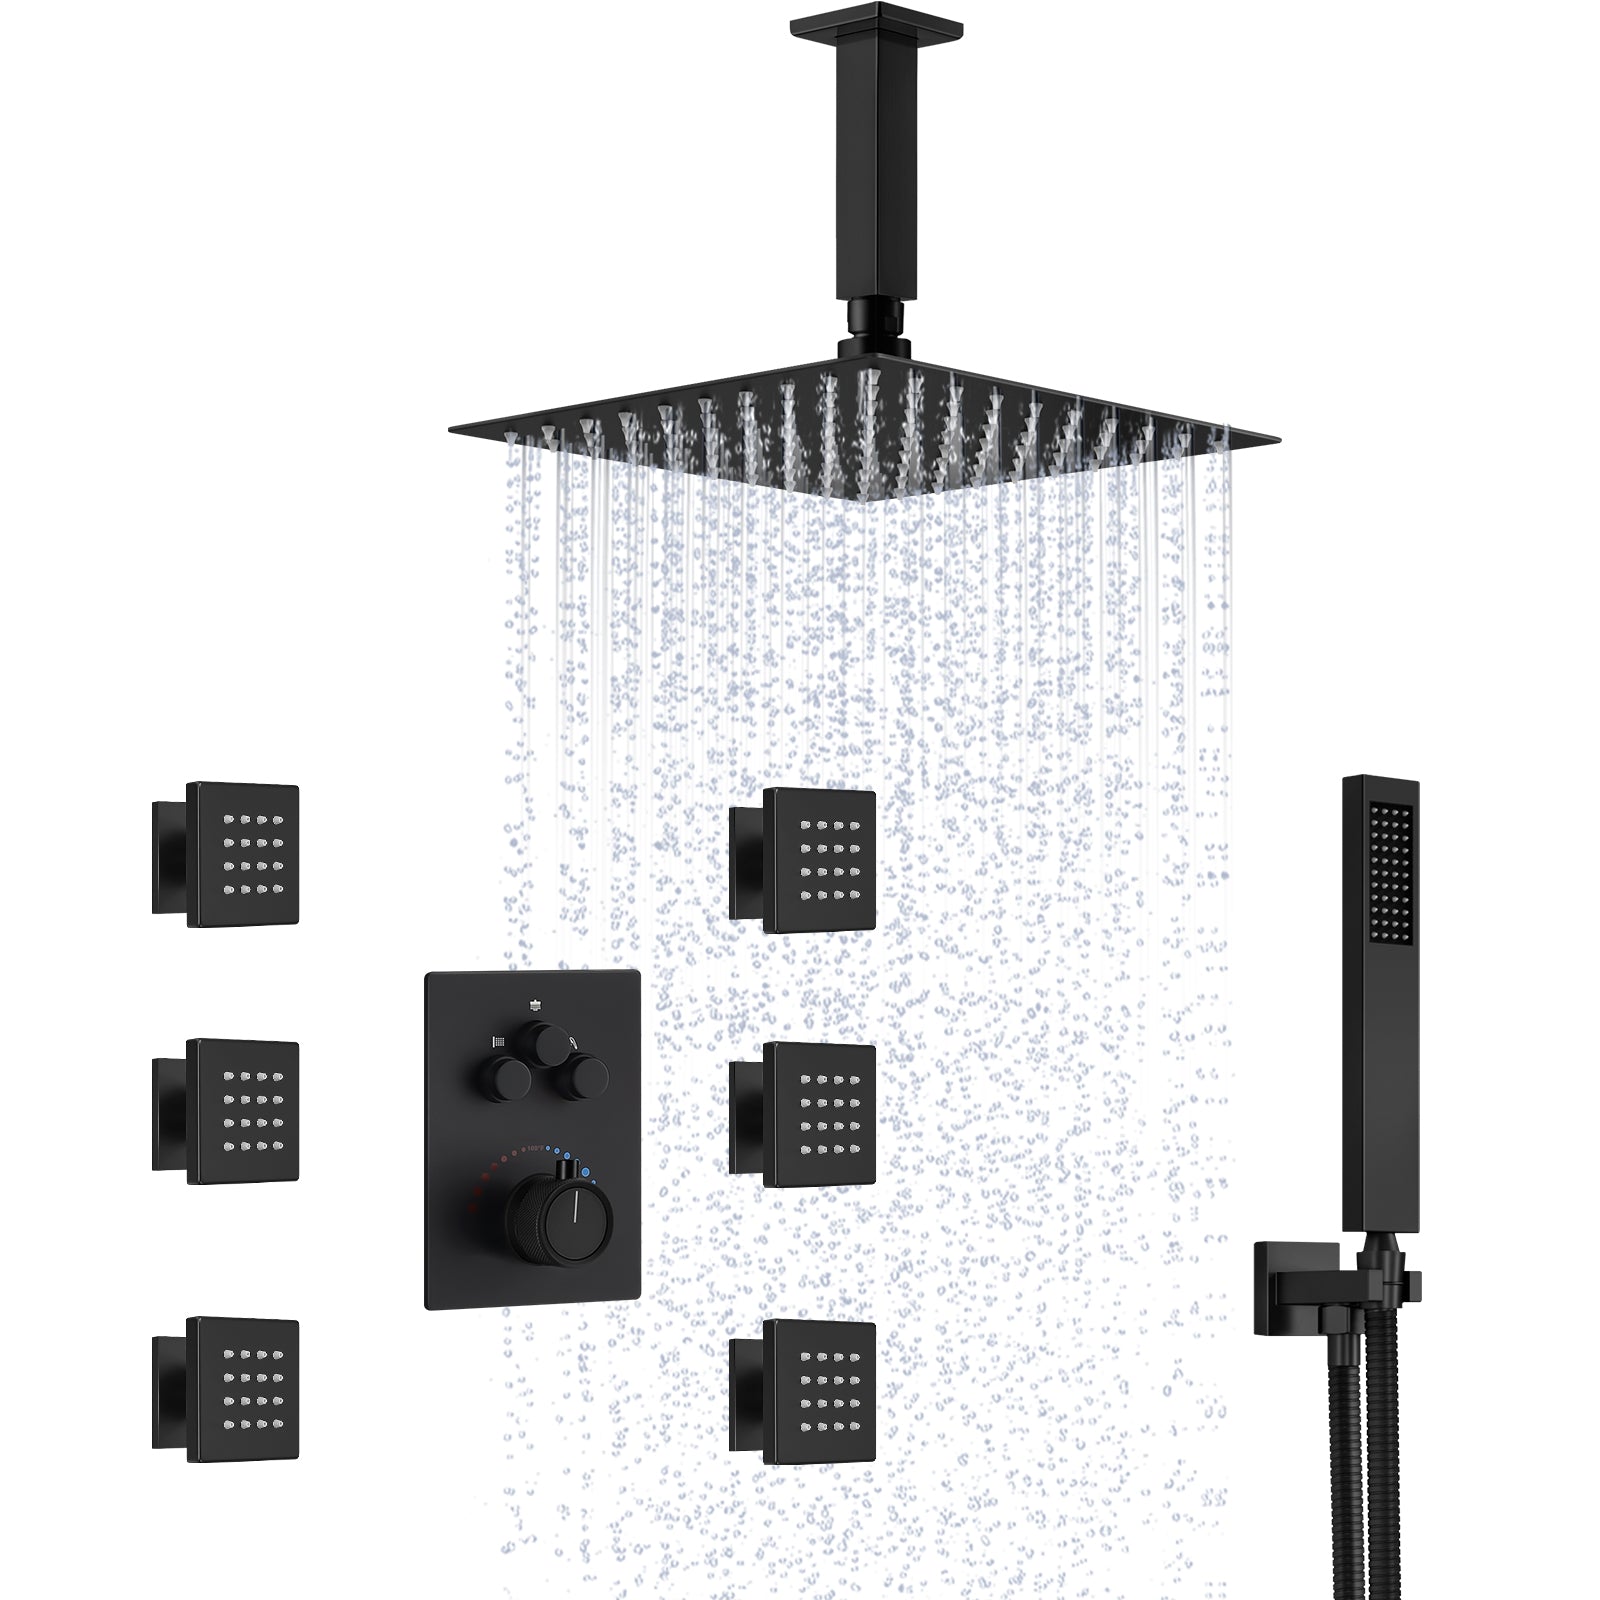 SFS1006-BK12 EVERSTEIN Thermostatic Shower Faucet with Rough-in Valve Rainfall Shower System Ceiling Mounted with 6 Massage Body Jets and Handheld Sprayer